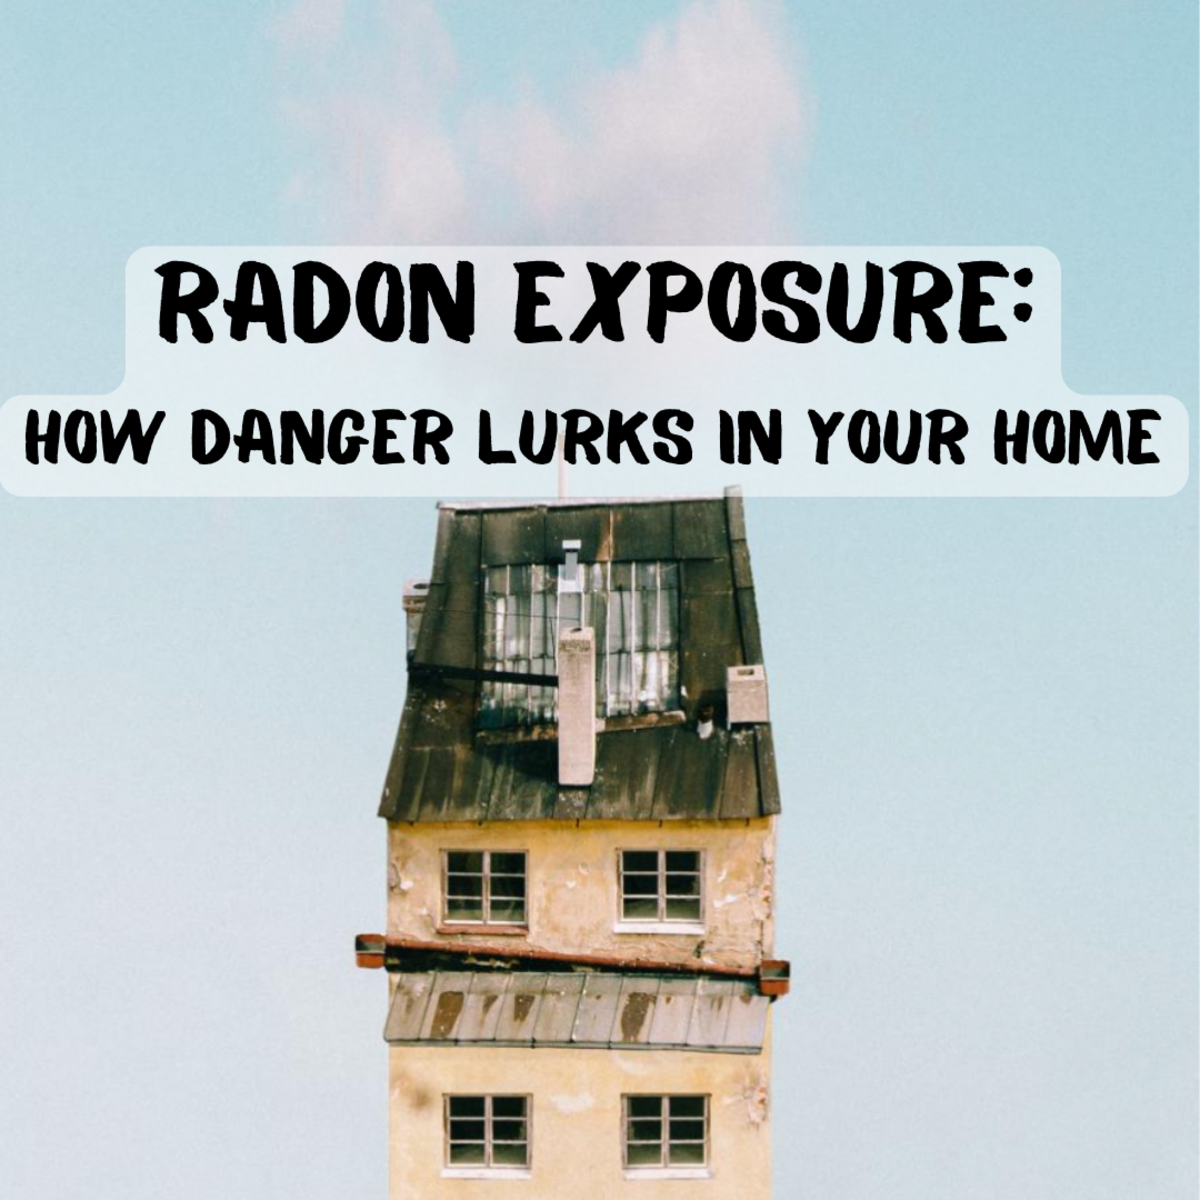 Read on for a helpful mitigation strategy to reduce and remove radon from your house.